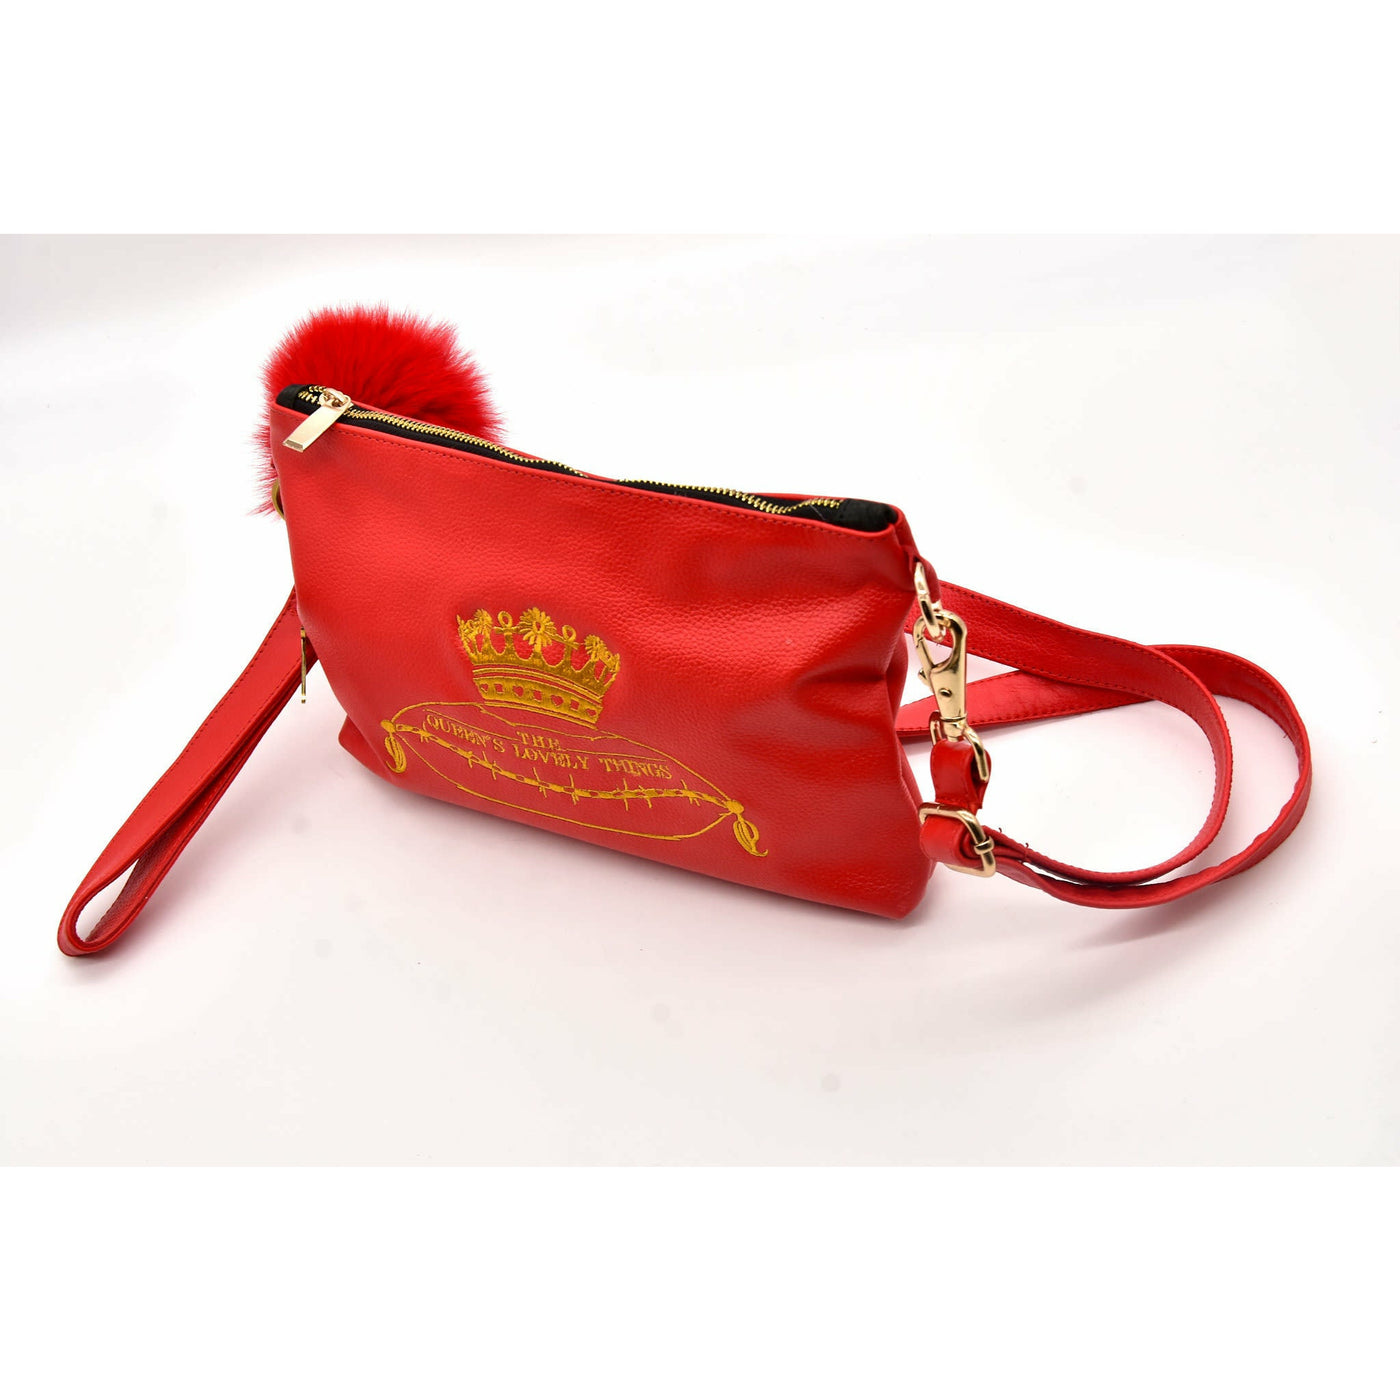 Queen’s Lovely Things Limited Edition Crossbody Wristlet Bag